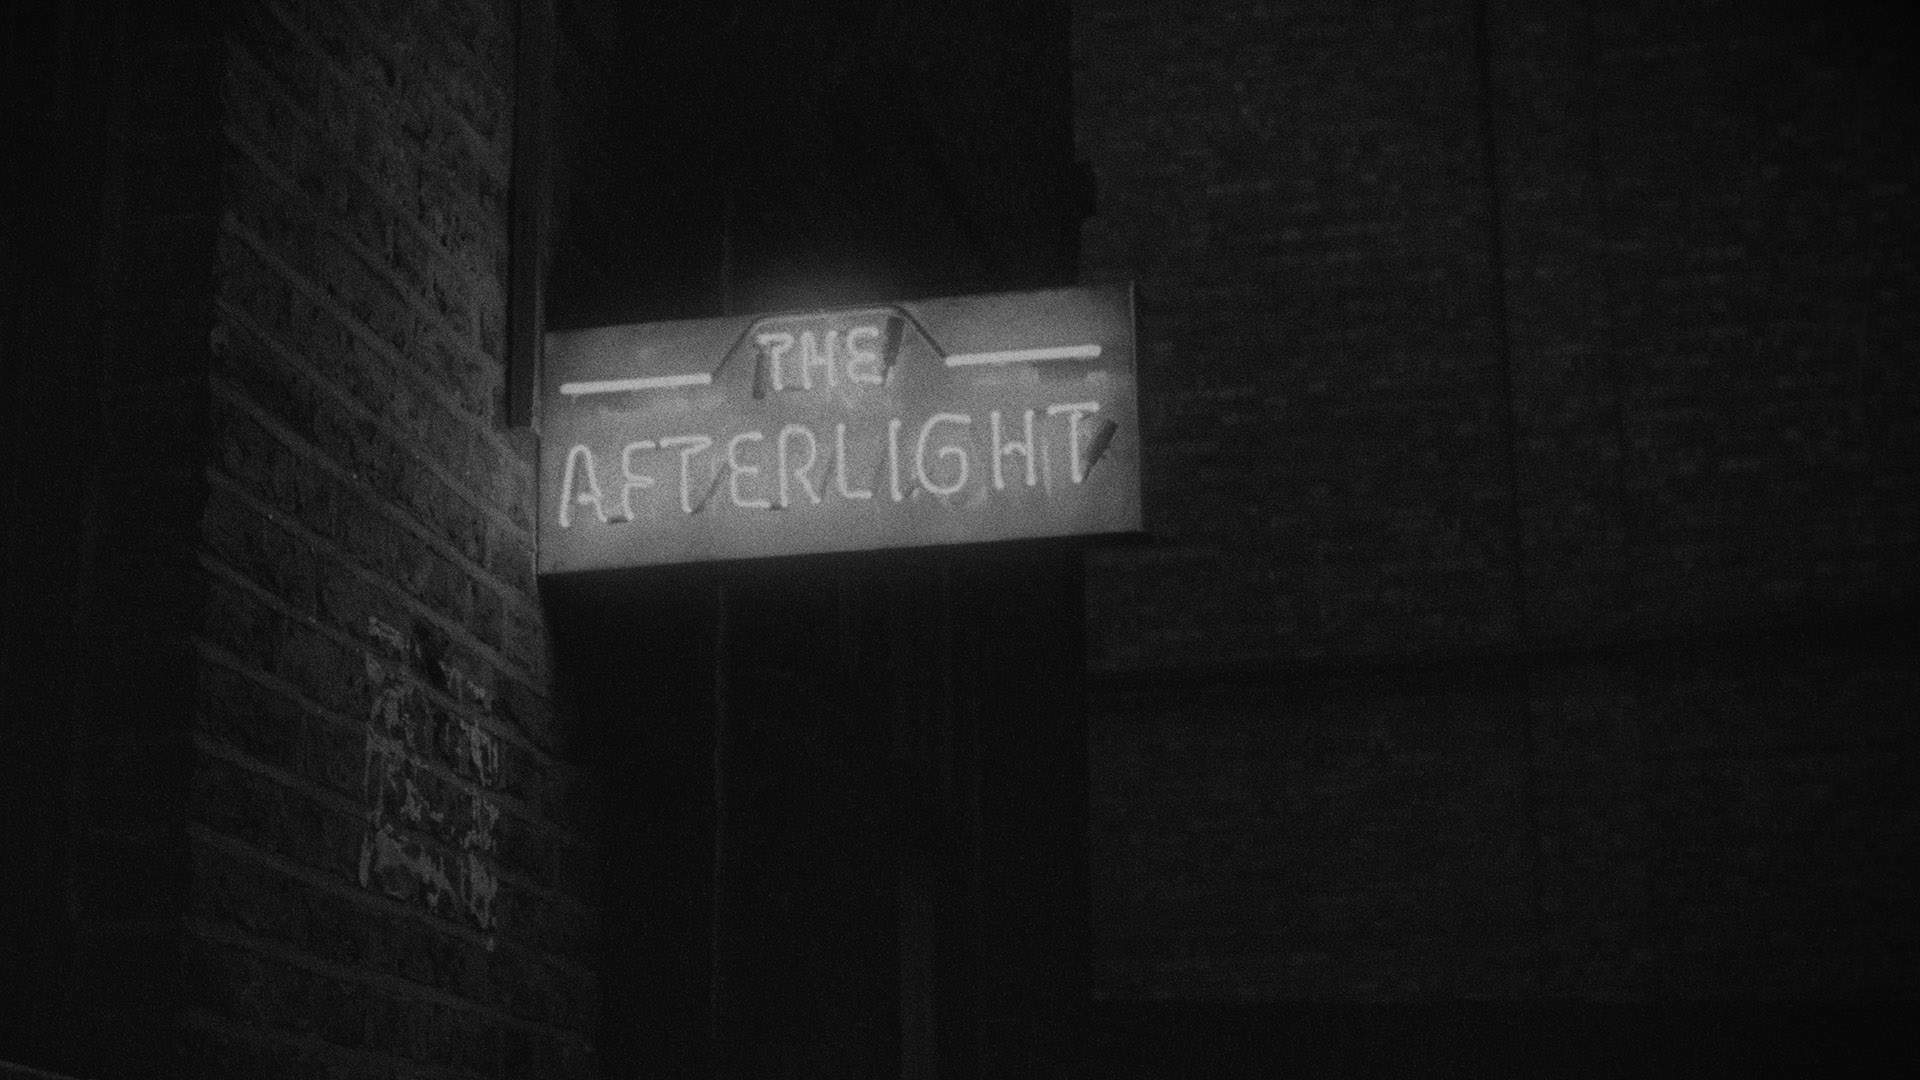 'The Afterlight' Screening and In-Conversation Session